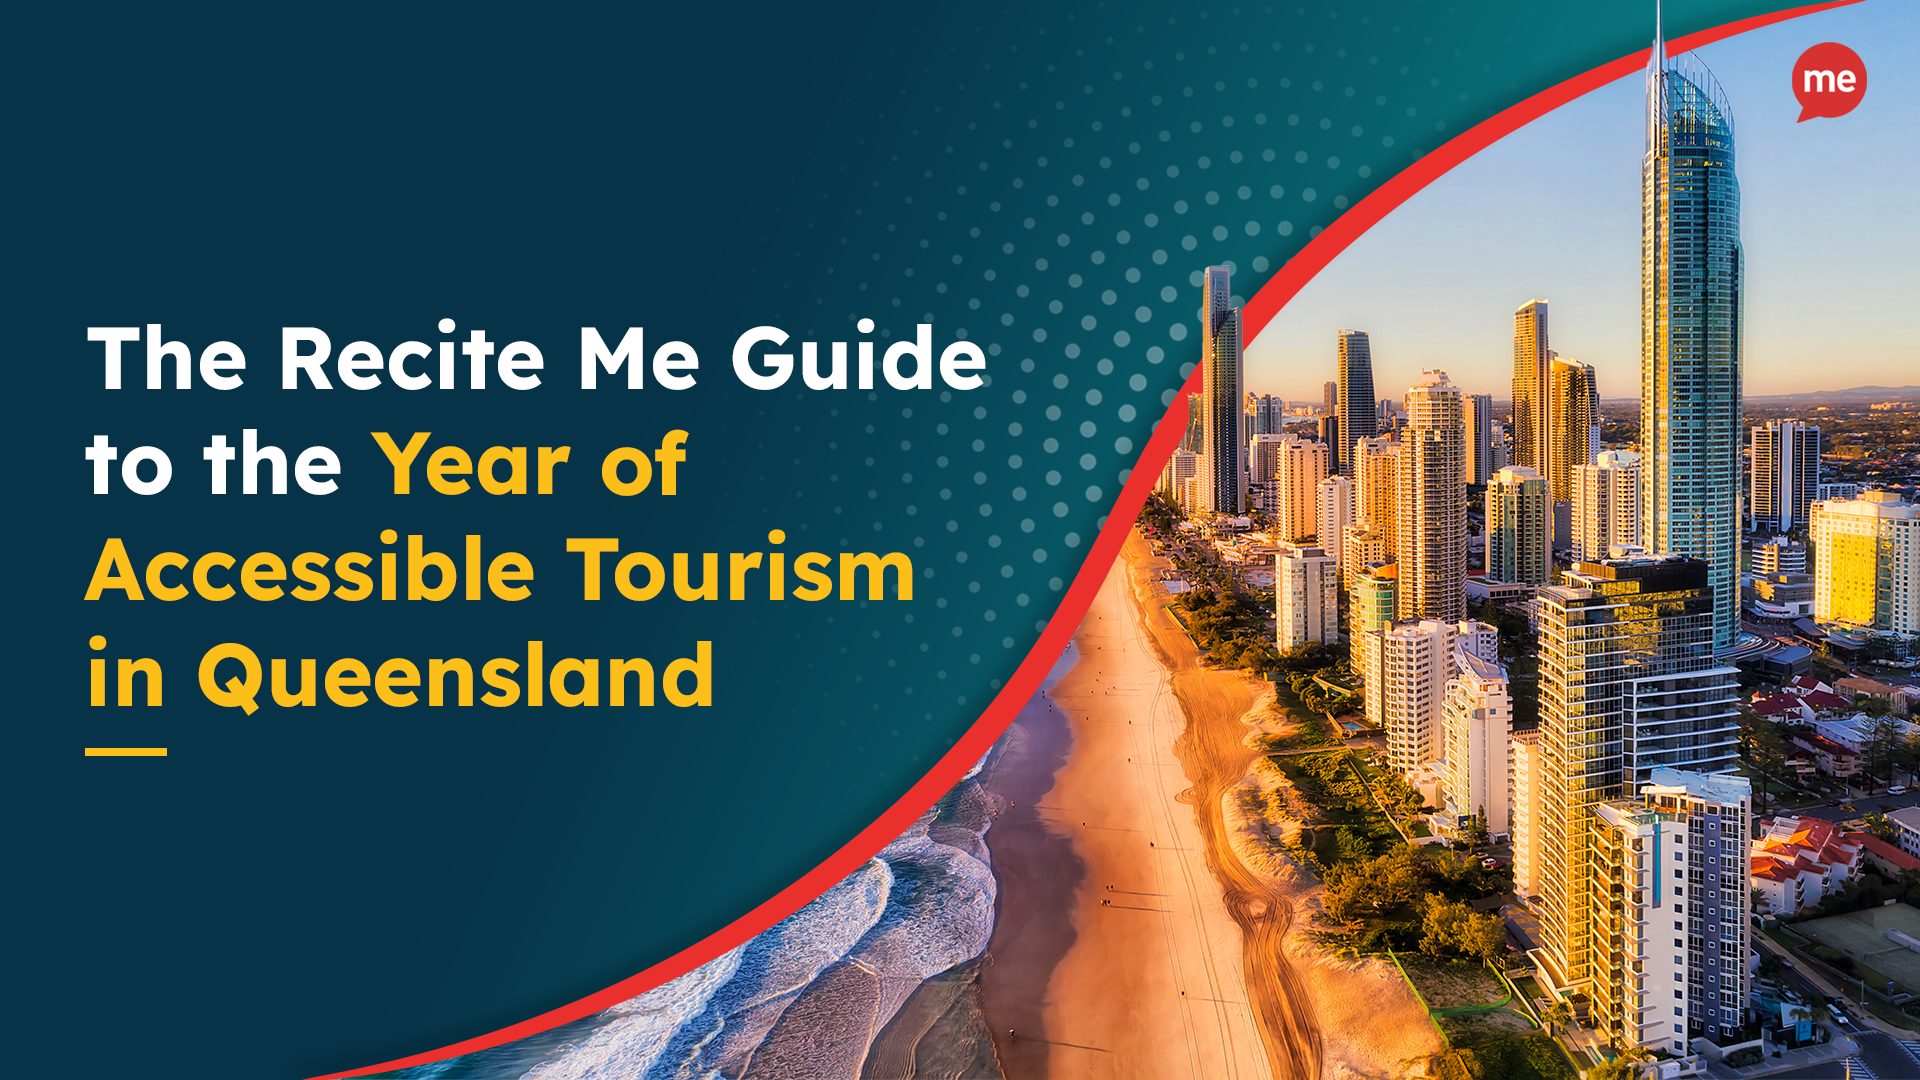 The Recite Me Guide to the Year of Accessible Tourism in Queensland